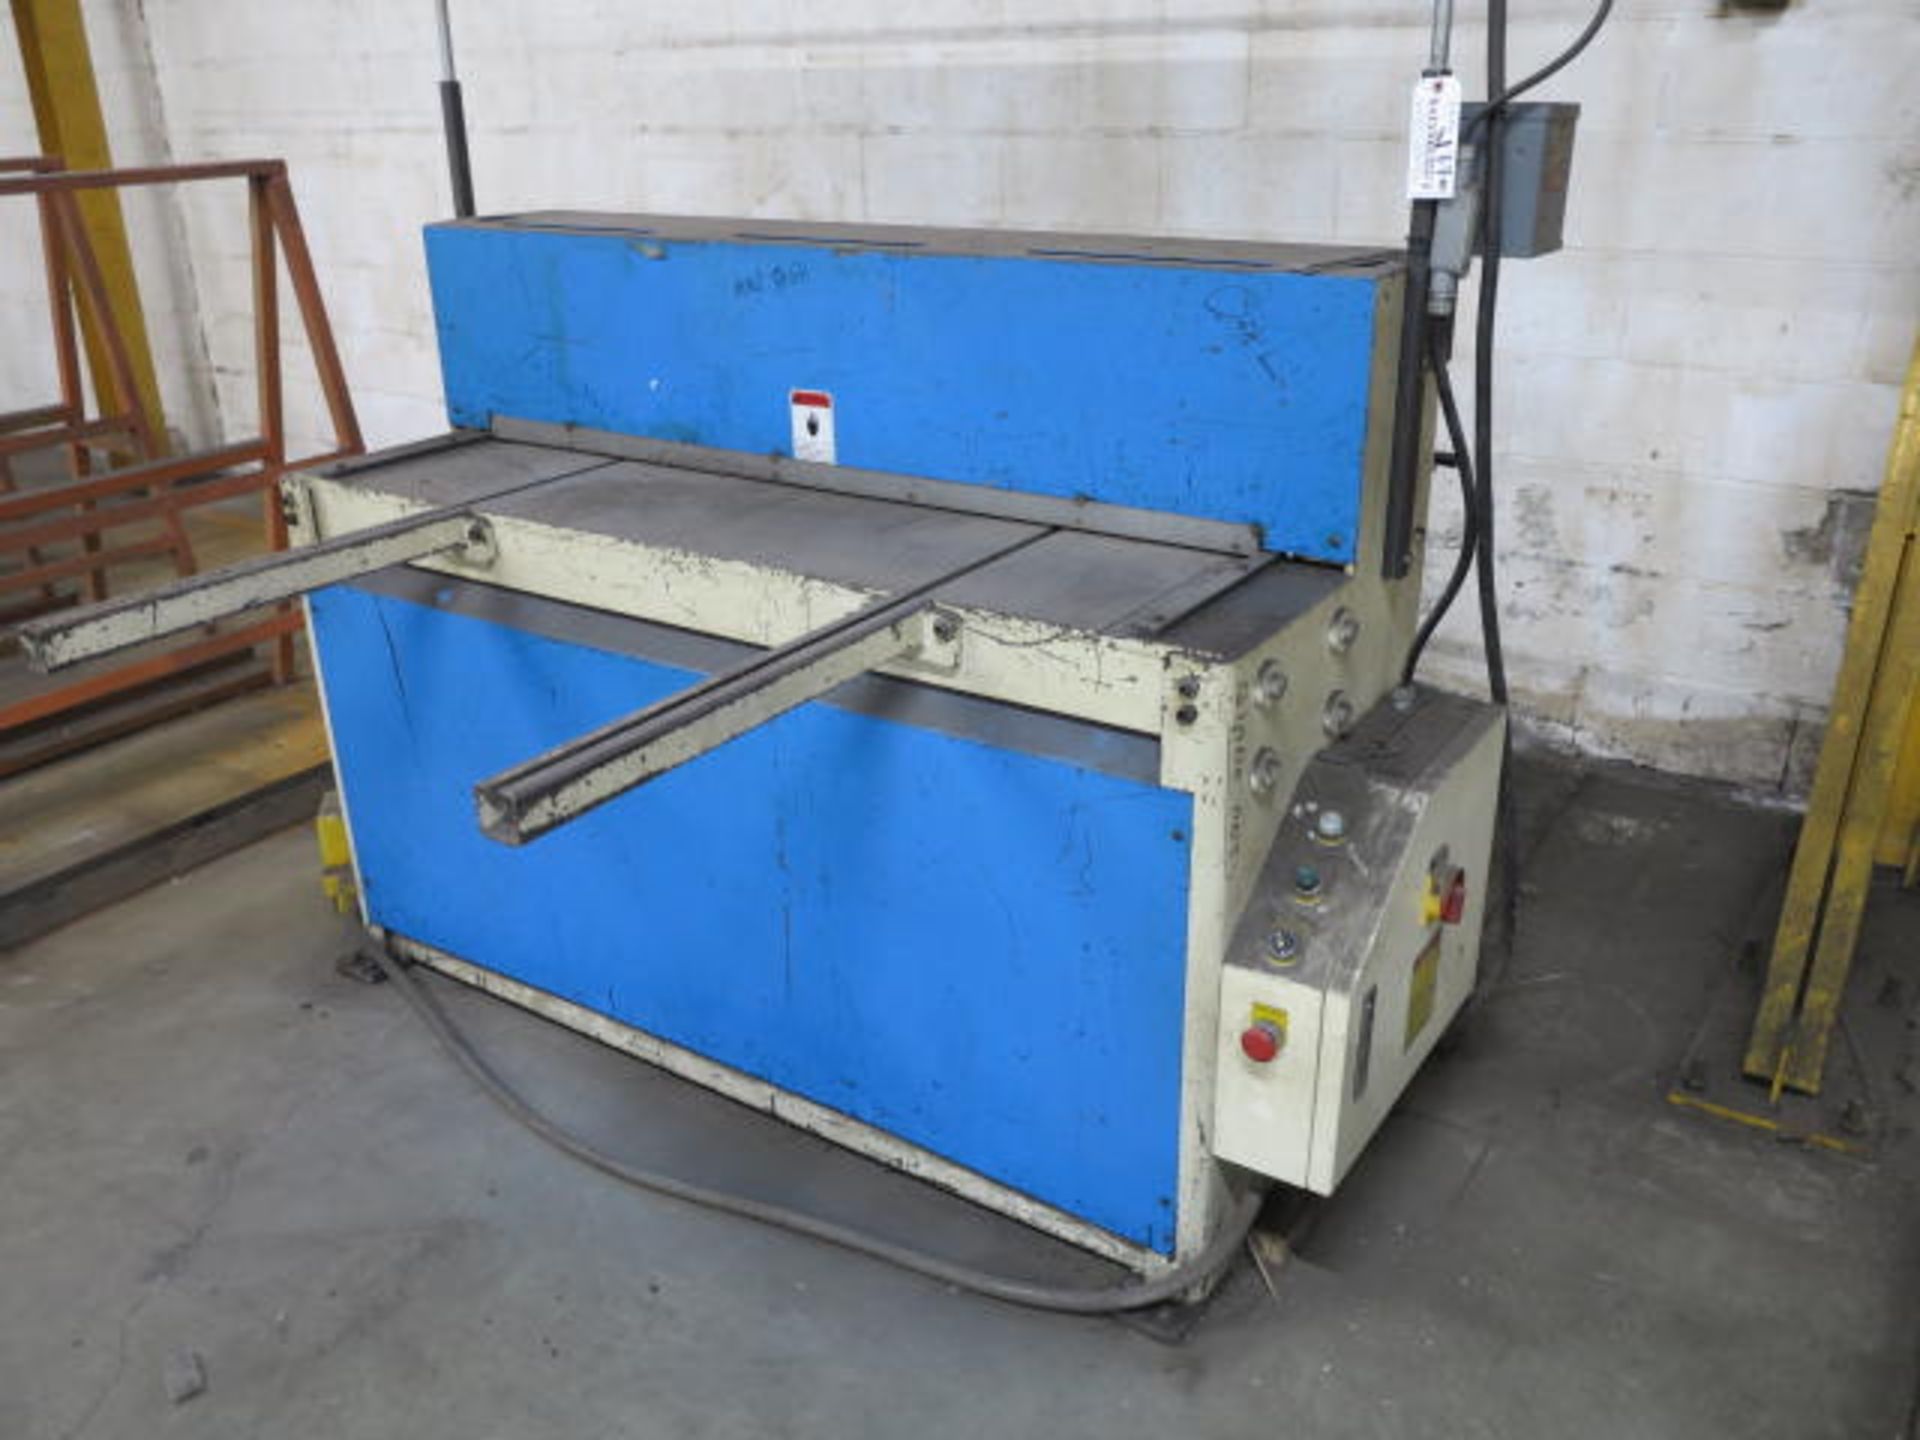 2000 Model H5210 Plate Shear Max 10 Gage x 4', S/N 4829 Hydraulic Action No Mfg Believed to be of